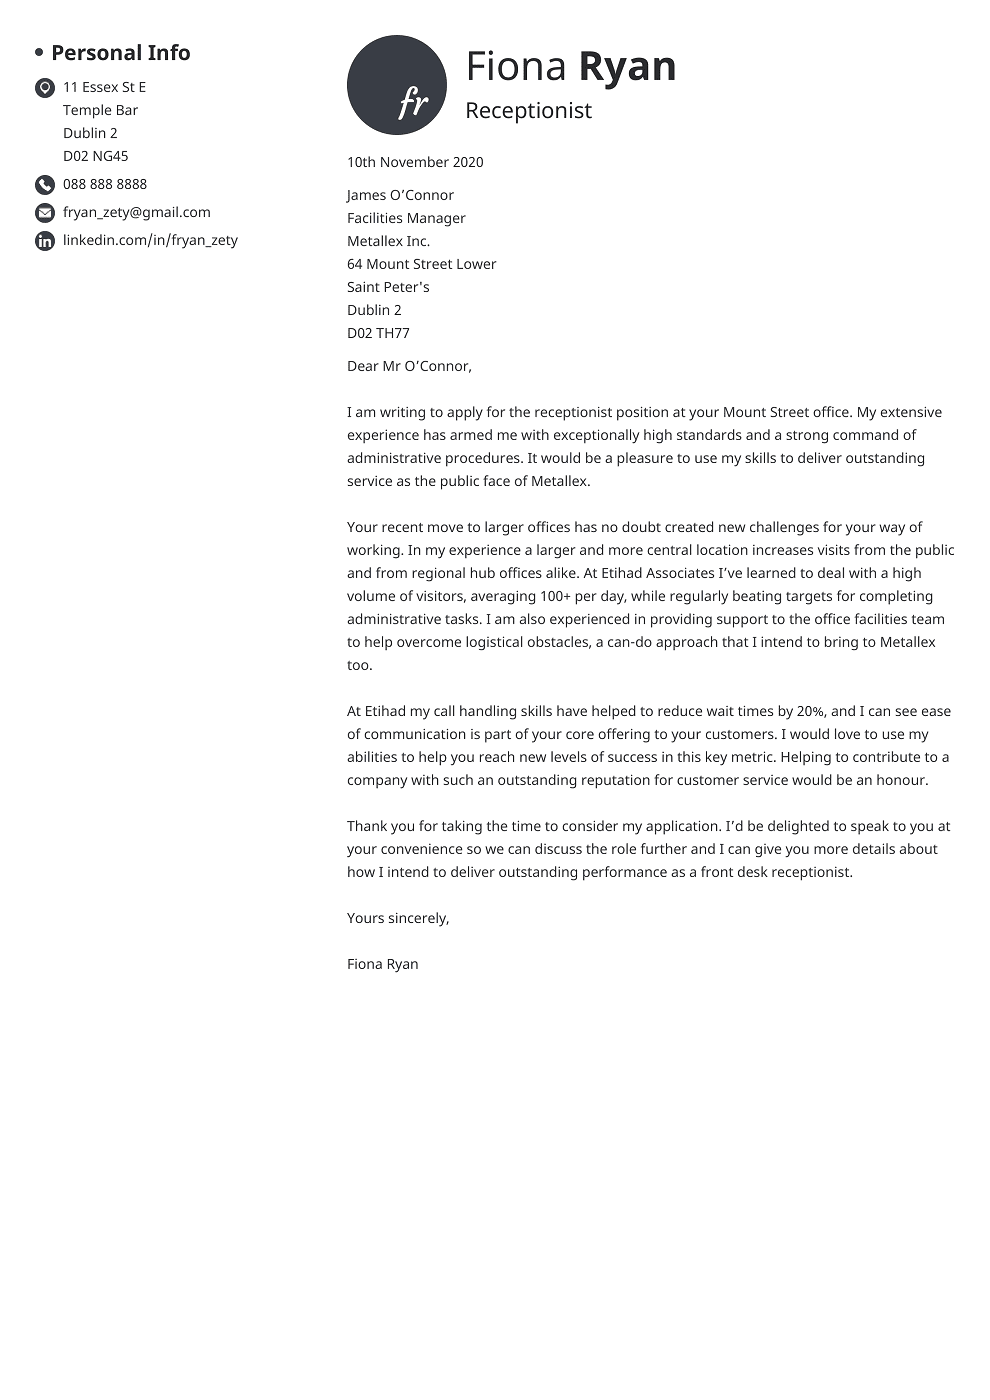 Professional cover letter Template Initials